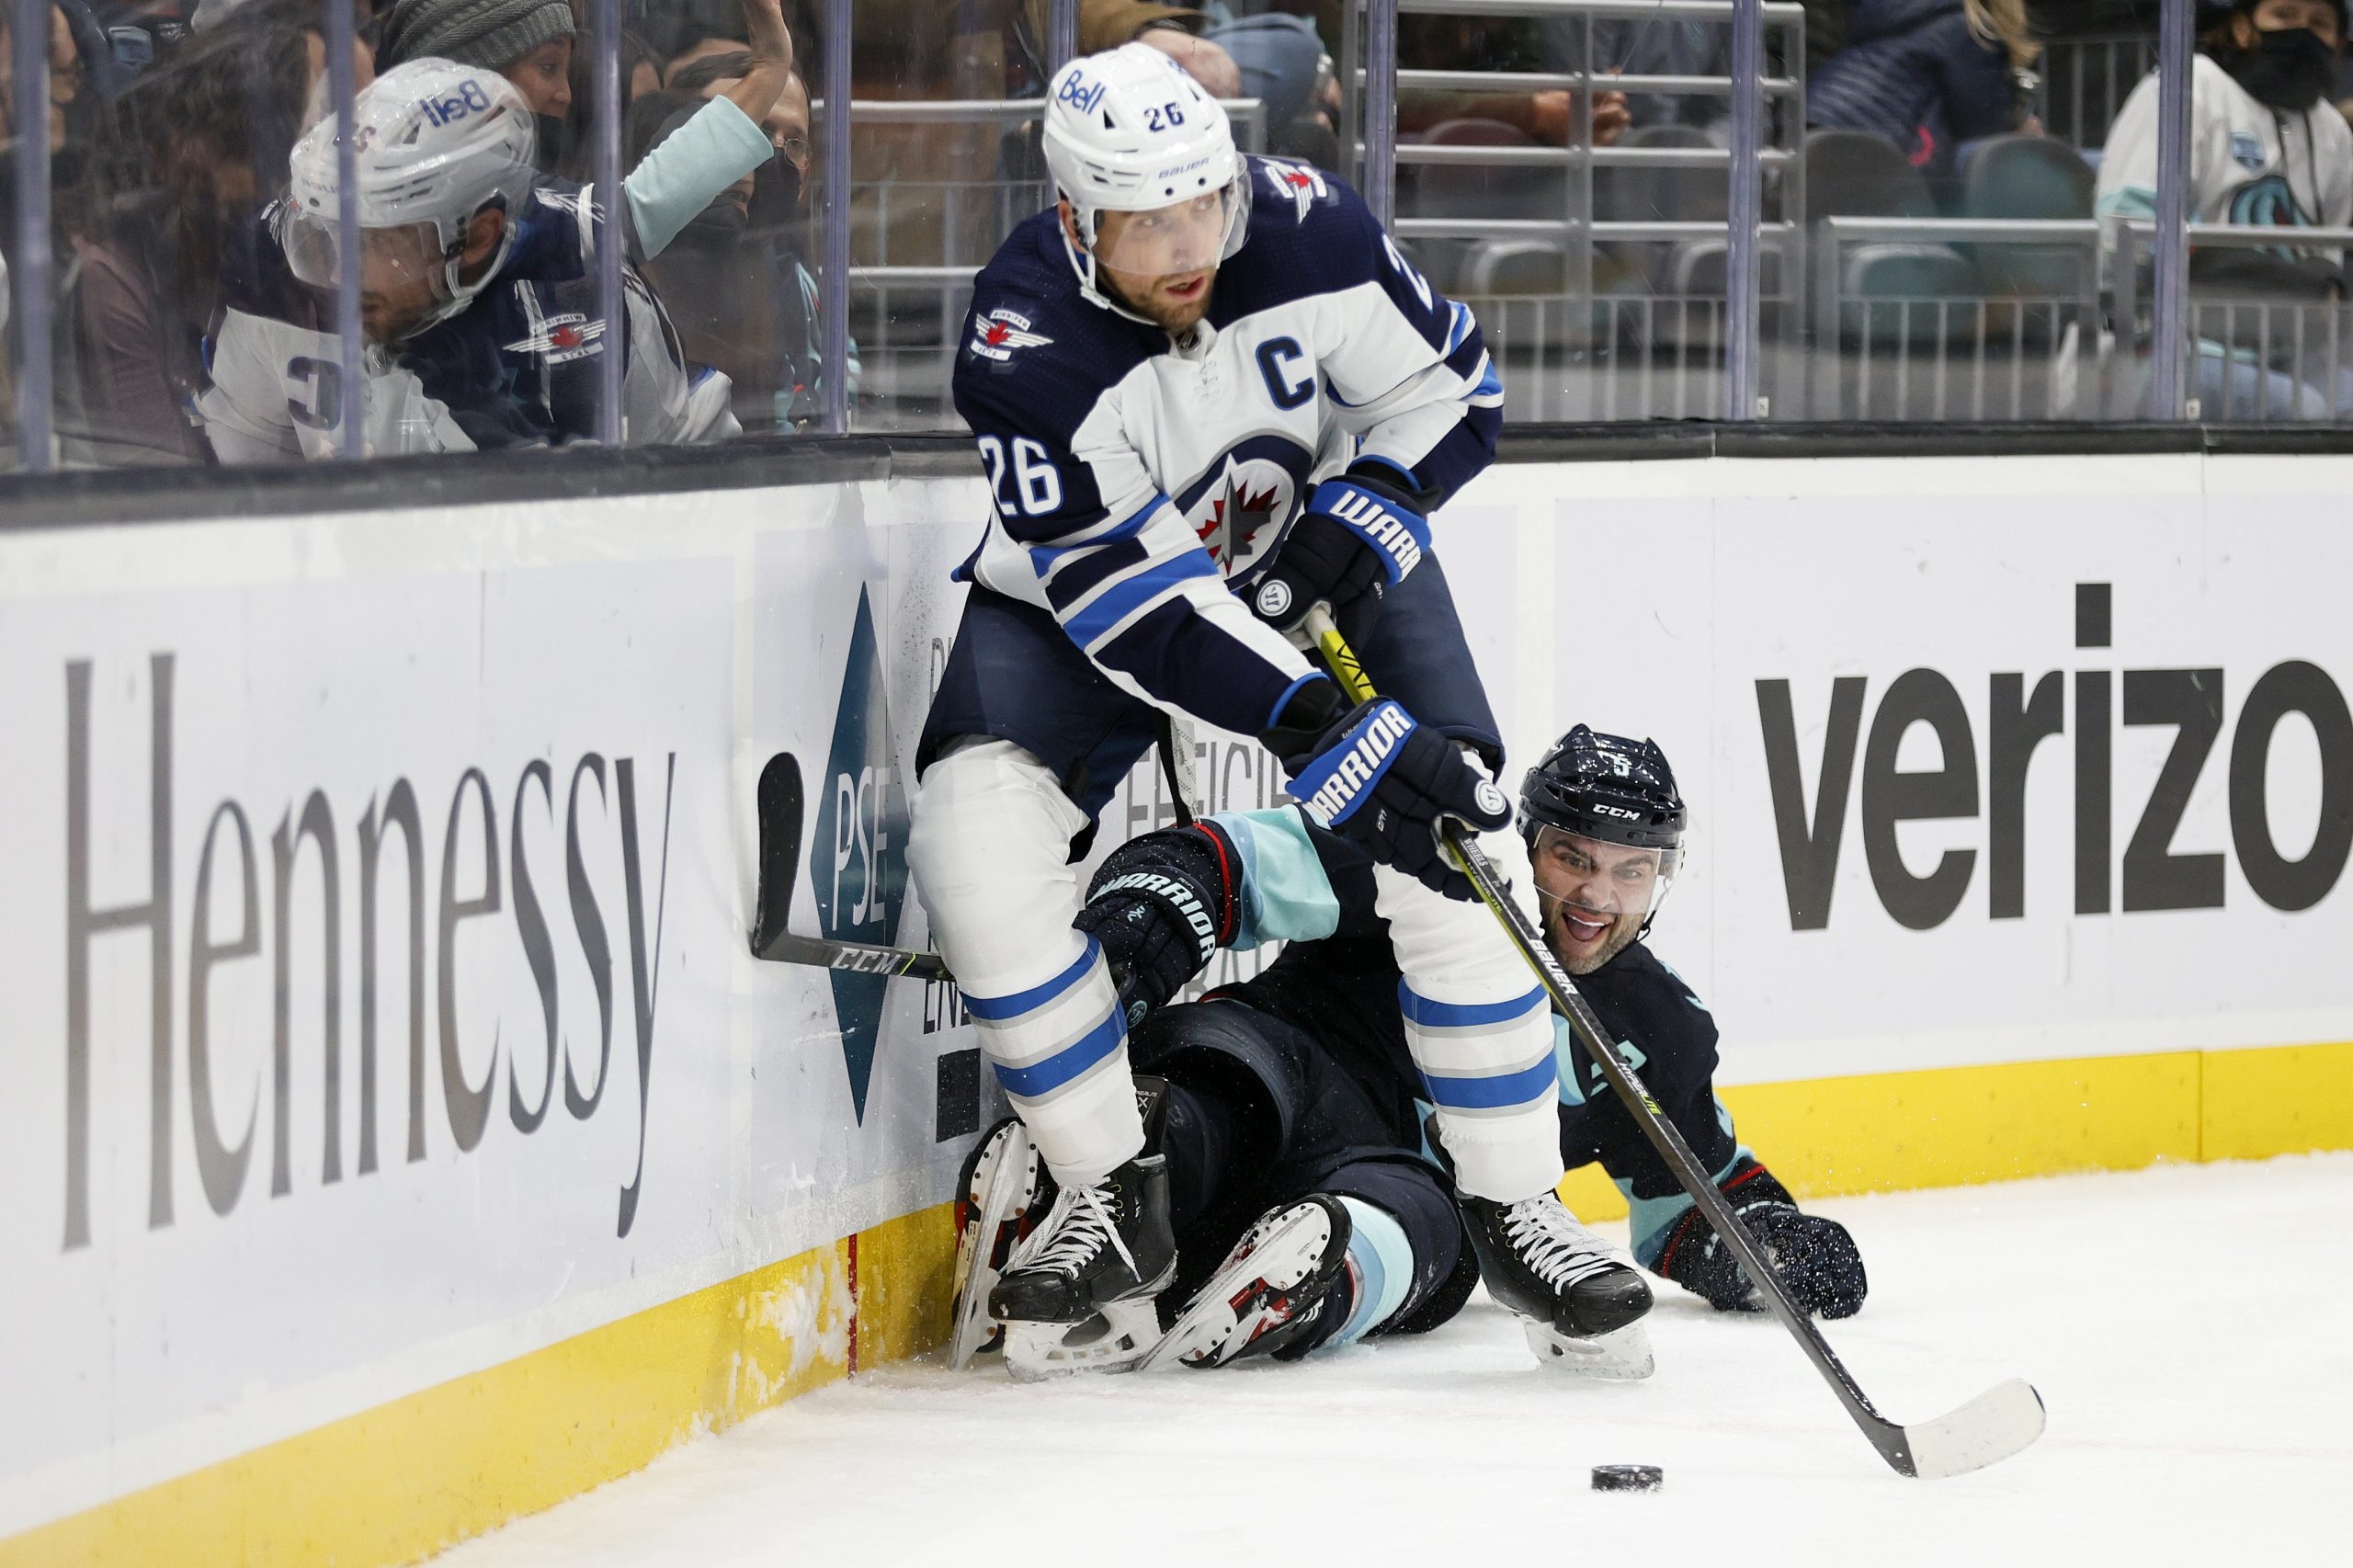 Jets captain Blake Wheeler out weeks with lower-body injury, coach says